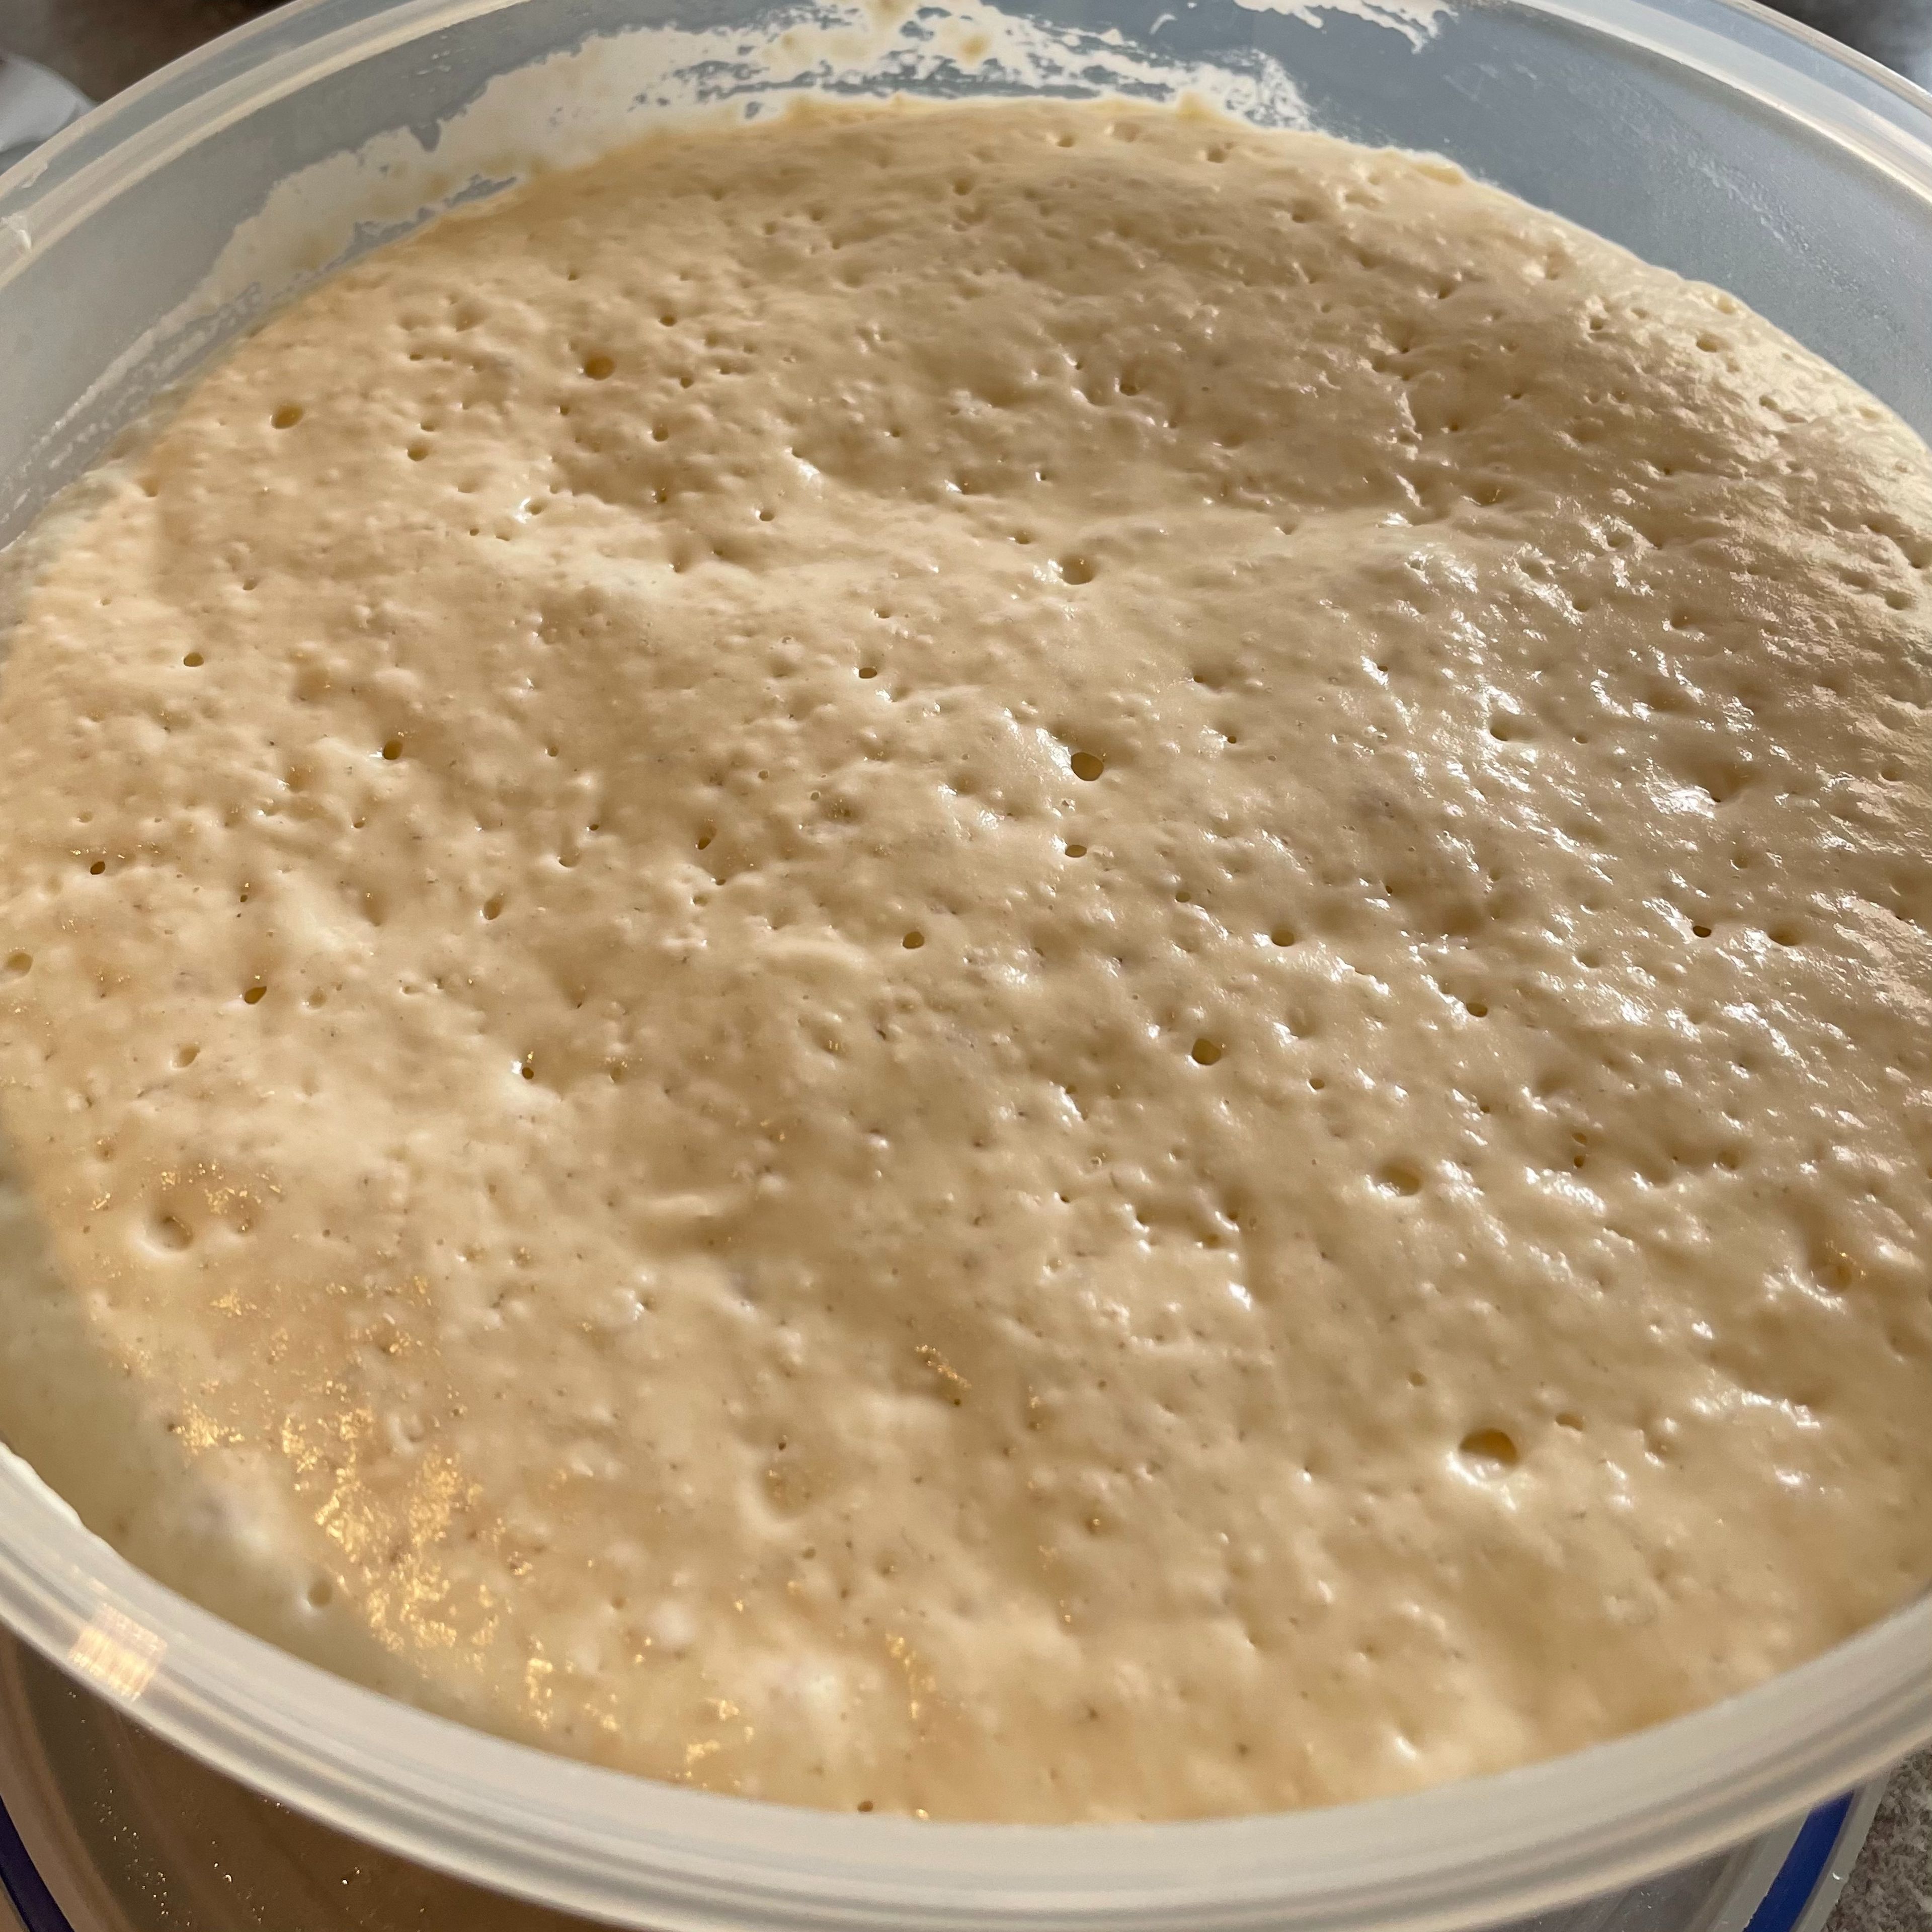 Cover the bowl and let the batter rise till it doubles in volume and is all bubbly. It will take about 40..60min, though yeast has a mind of it’s own and it may take longer.